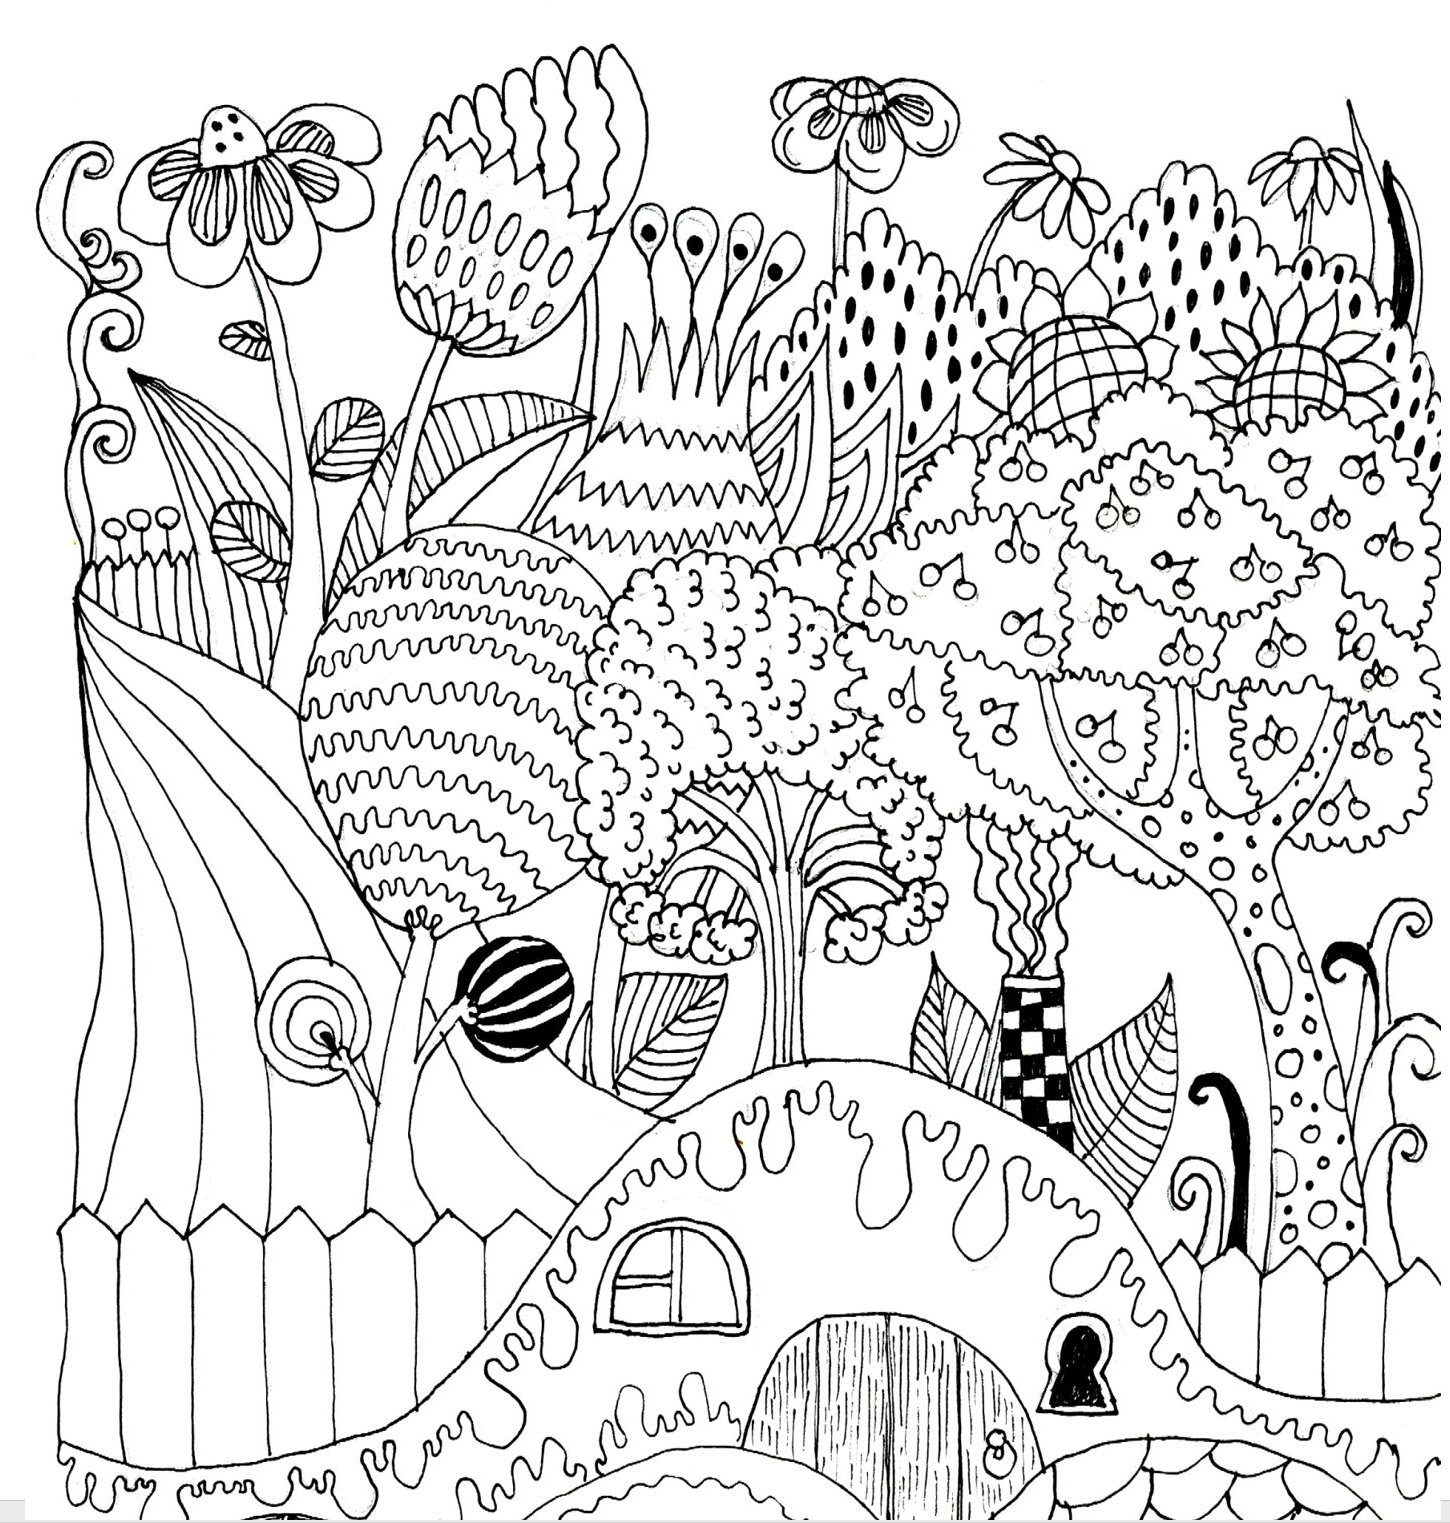 DDI 2345912 Nature - Adult Coloring Book and Colored Pencil Relax